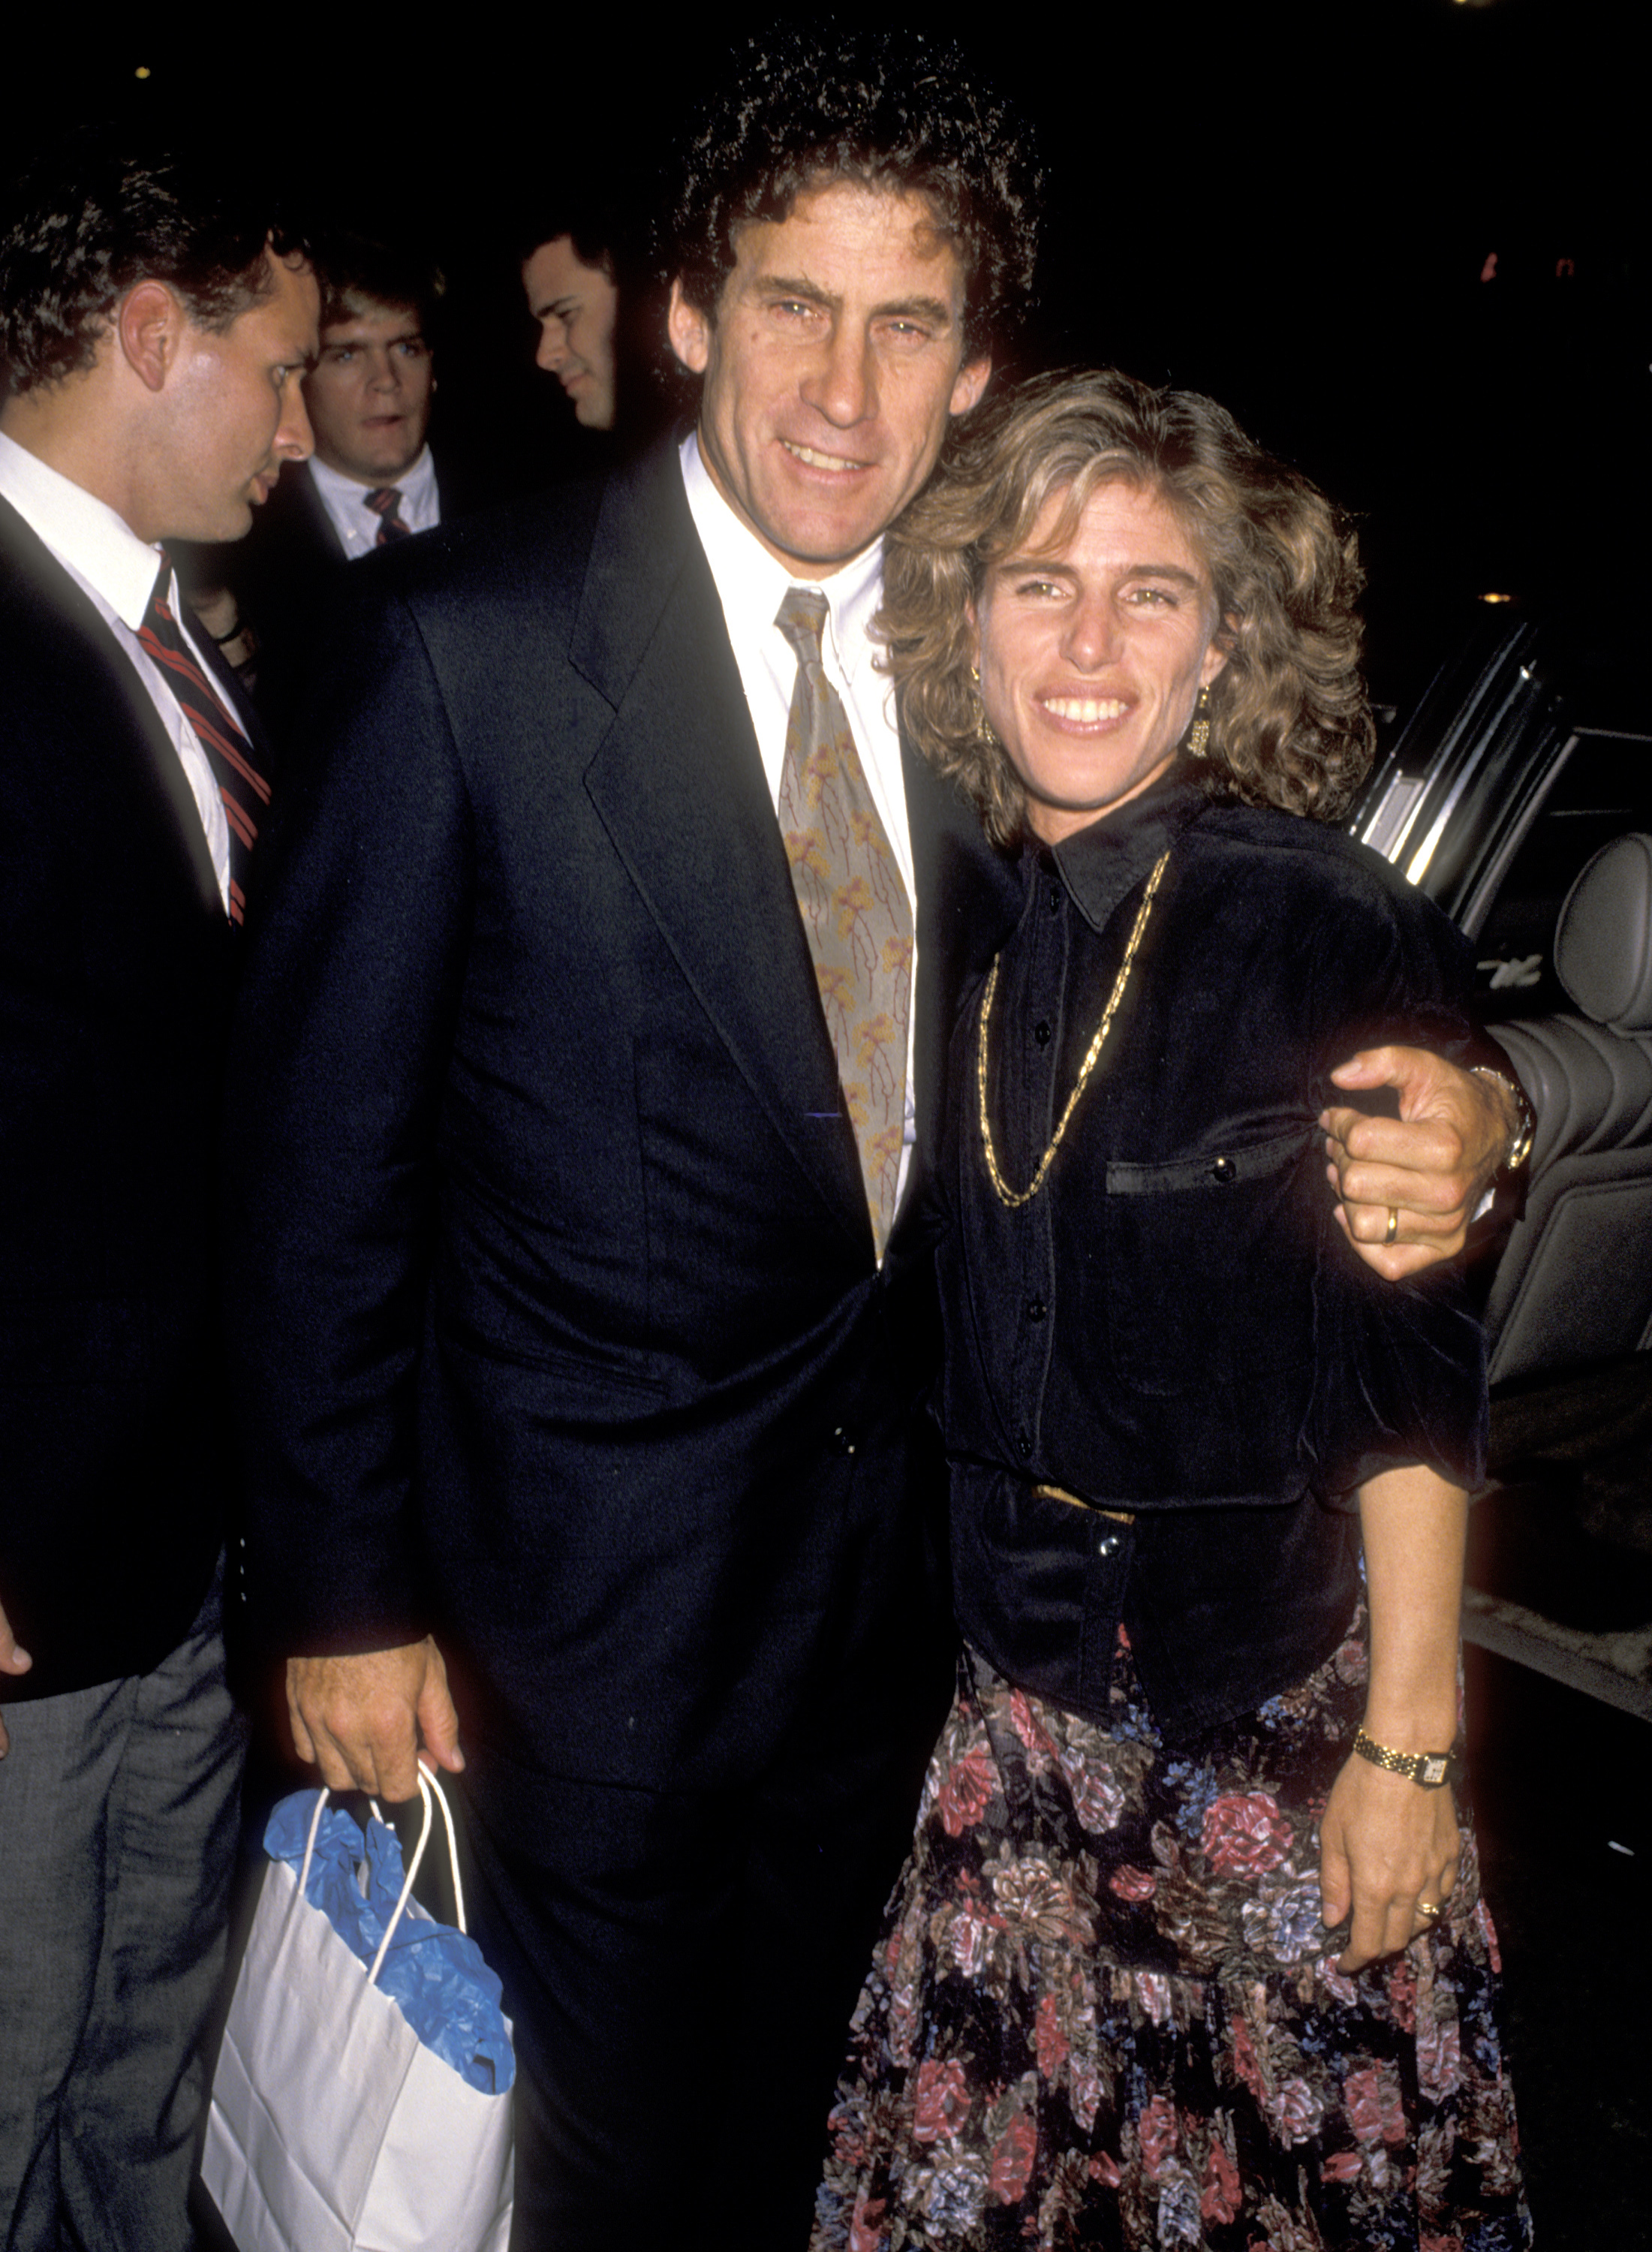 Paul Michael Glaser and his wife activist Elizabeth Glaser attend the "Immediate Family" Hollywood premiere party at Hollywood Palladium on October 24, 1989 in Hollywood, California | Source: Getty Images